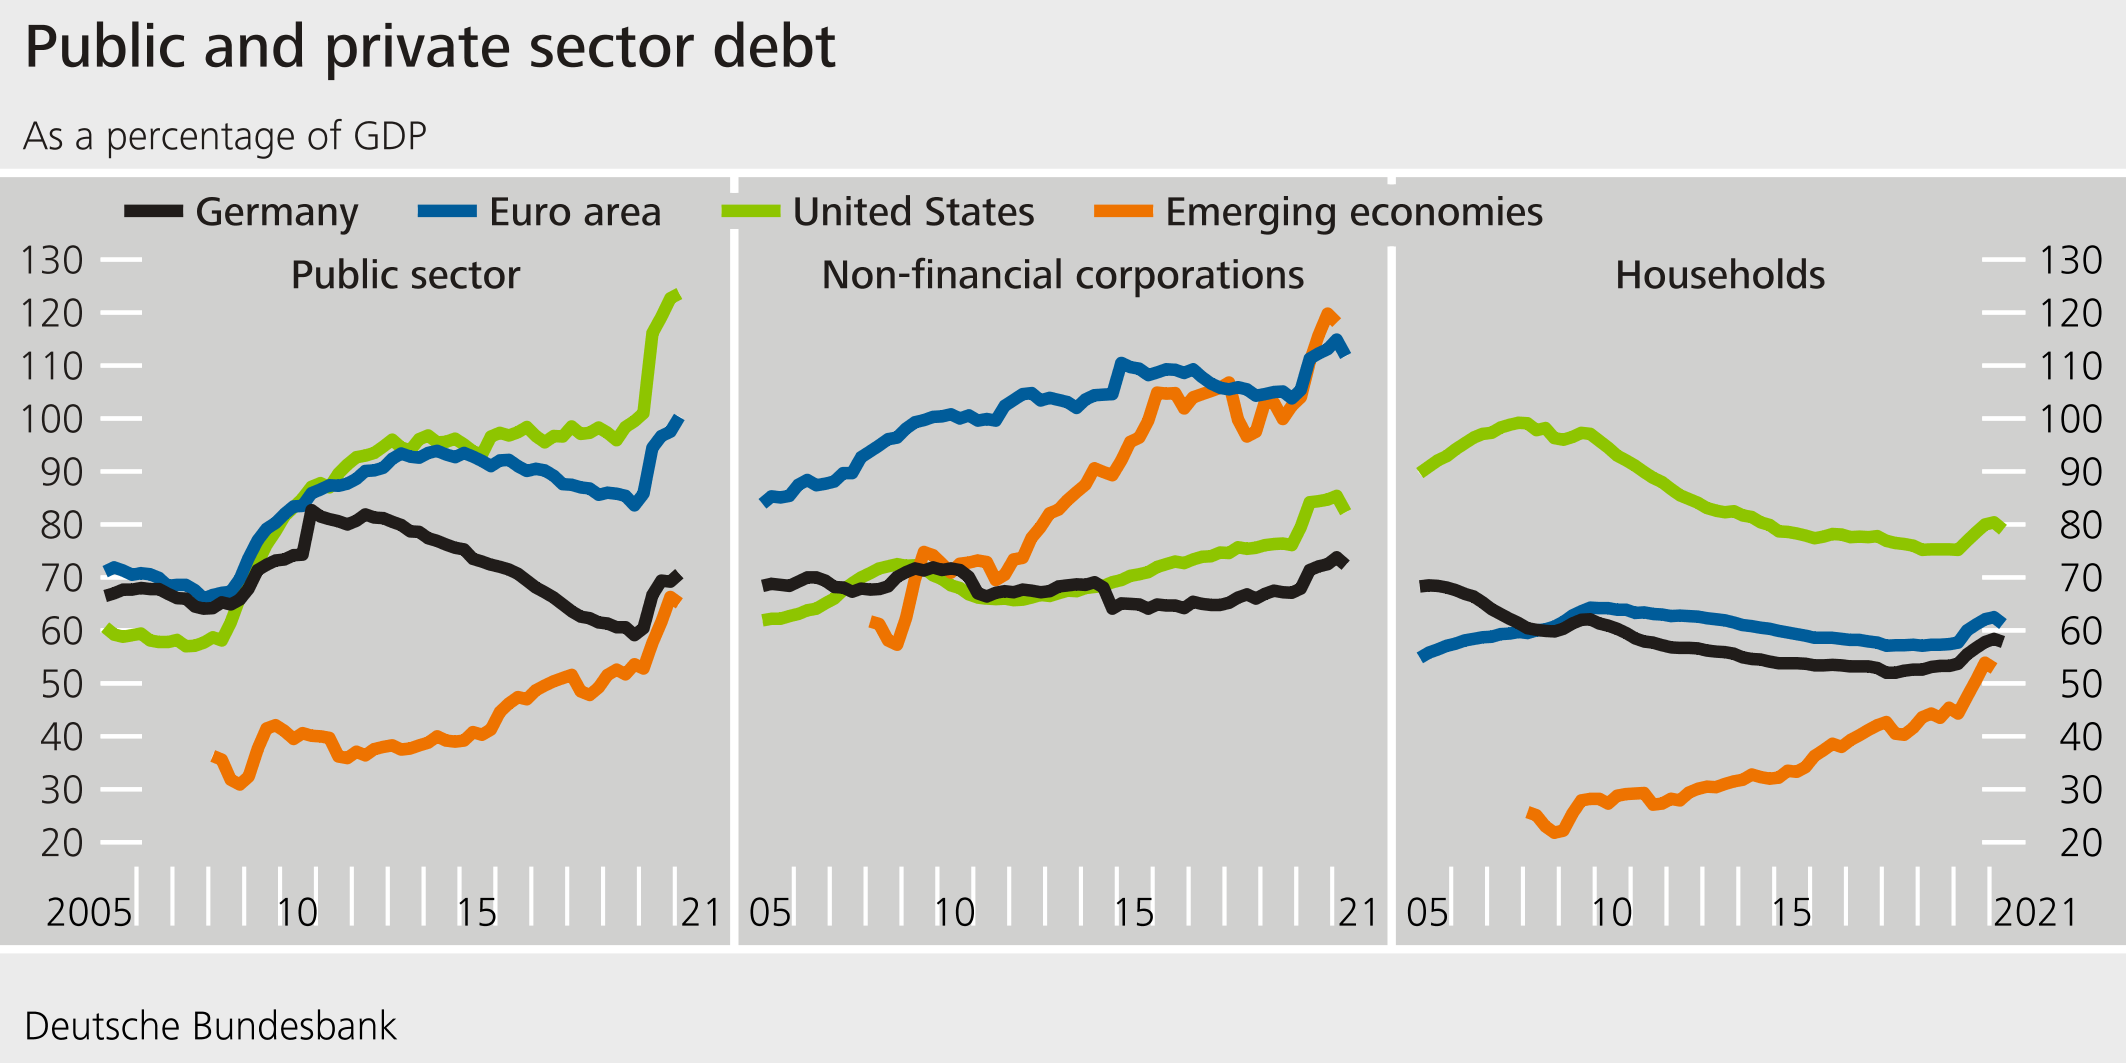 Public and privatesector debt